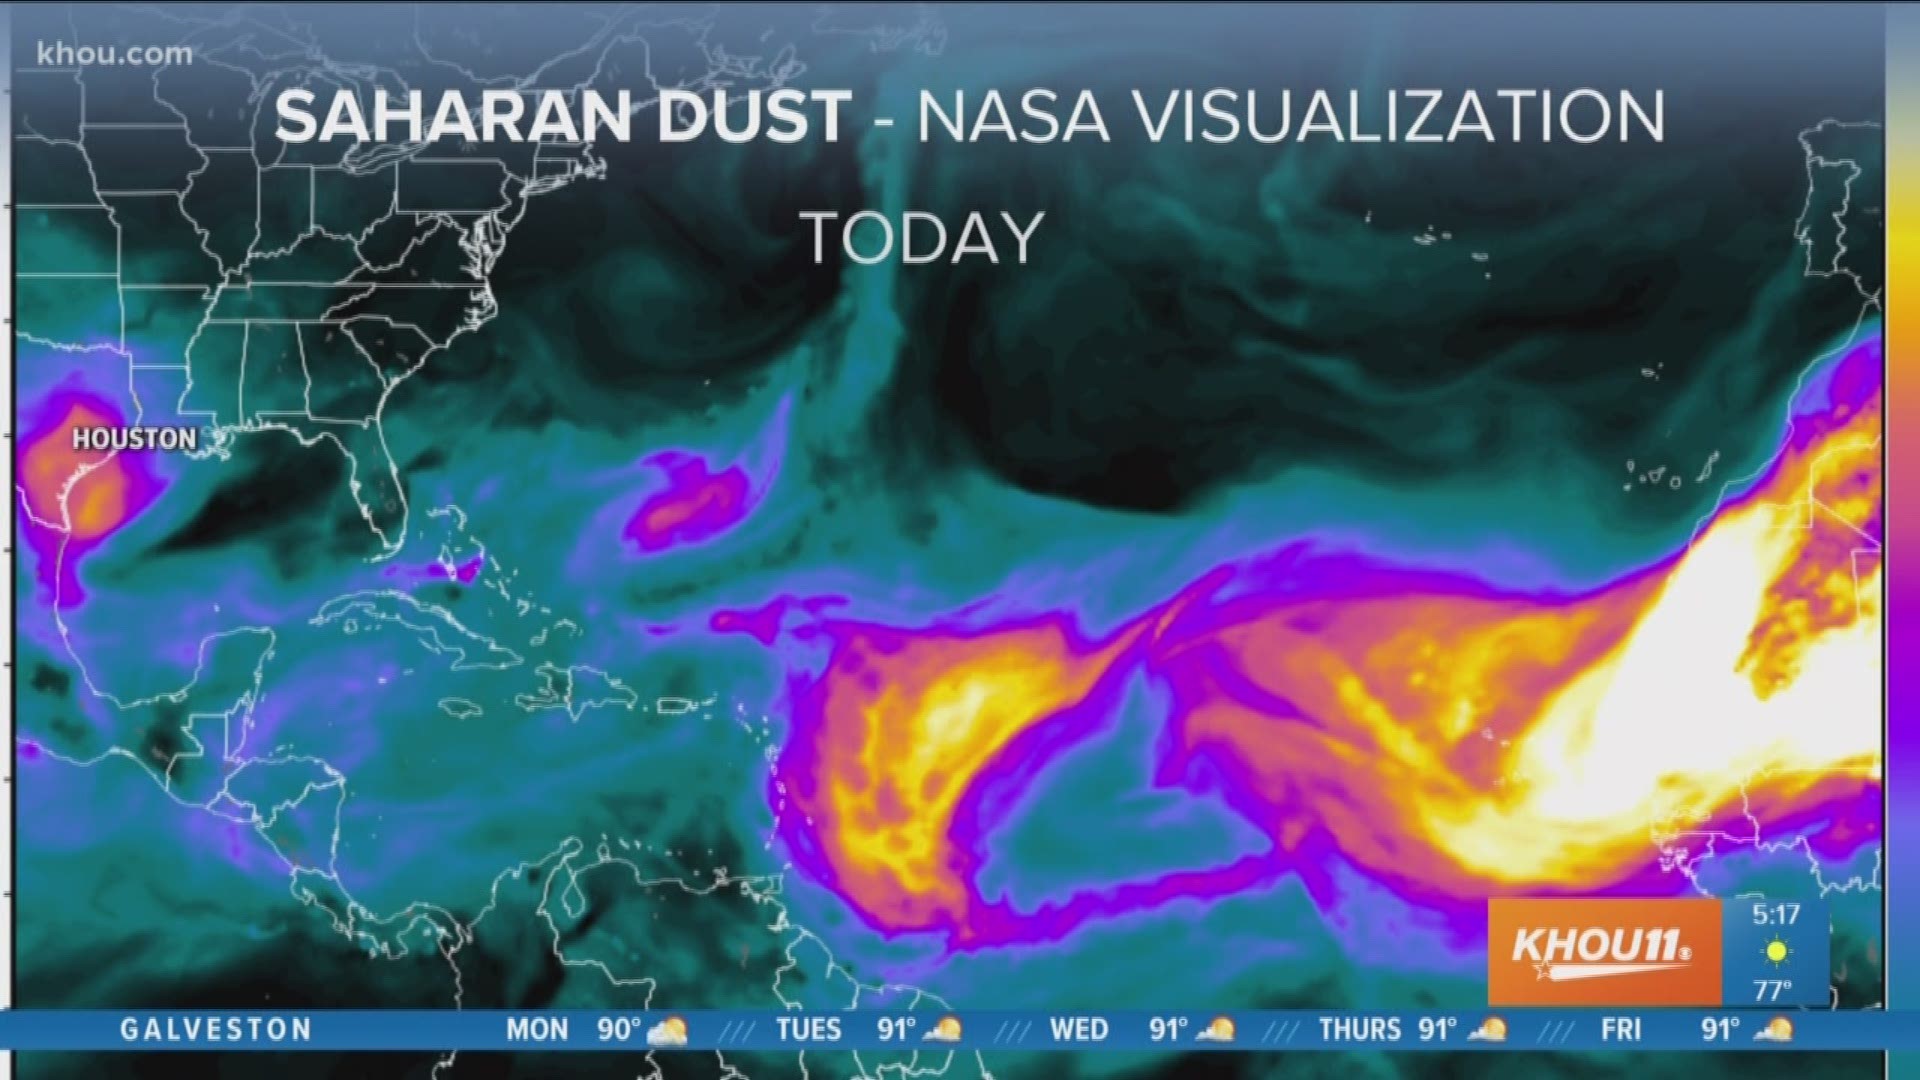 KHOU 11 Meteorologist Brooks Garner says the Saharan dust will reach its peak today which can lead to irritation of nose/lungs for some.